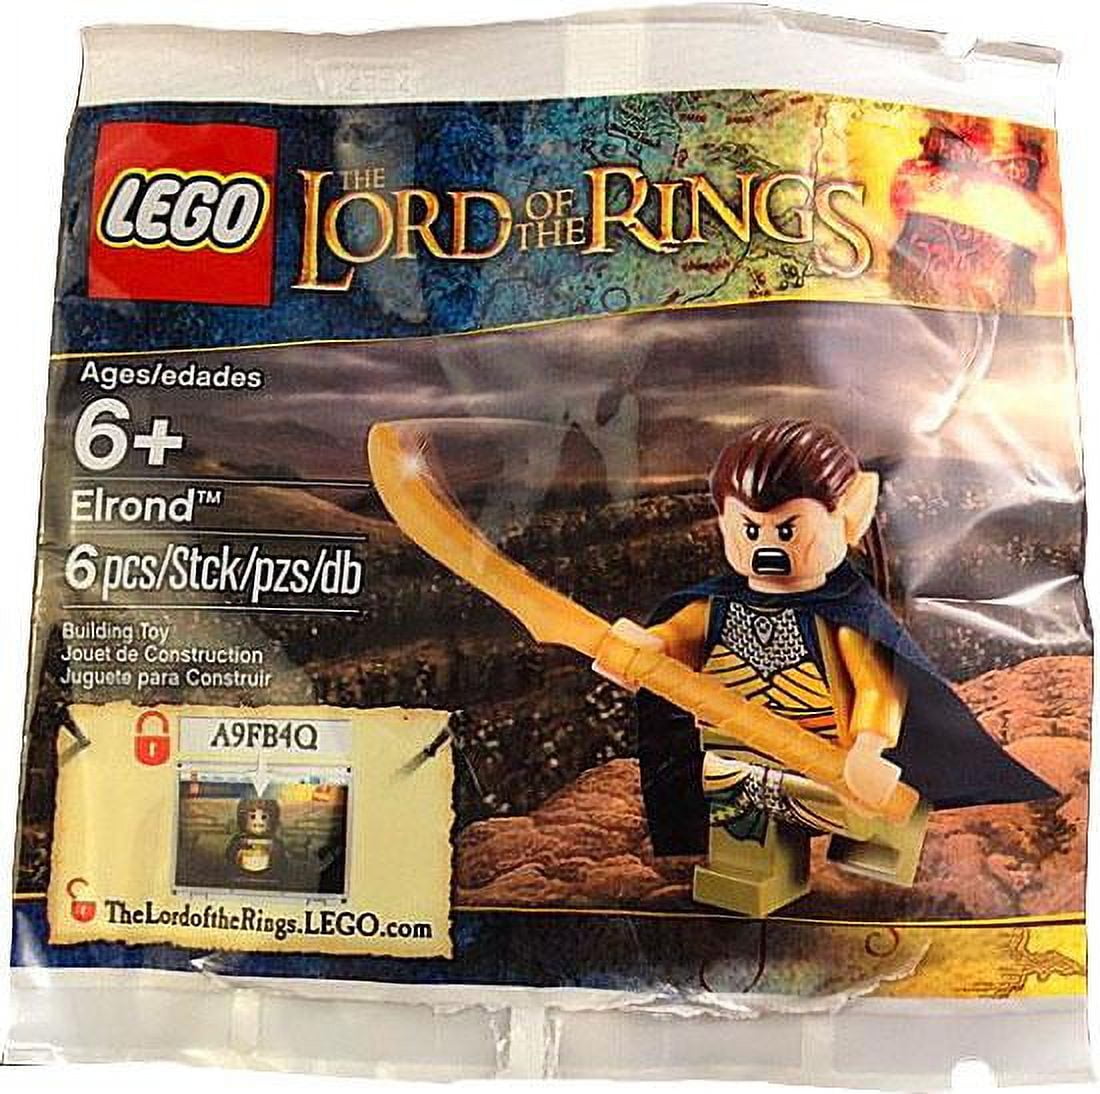 The Lord of the Rings Elrond Mini Set LEGO 5000202 [Bagged]